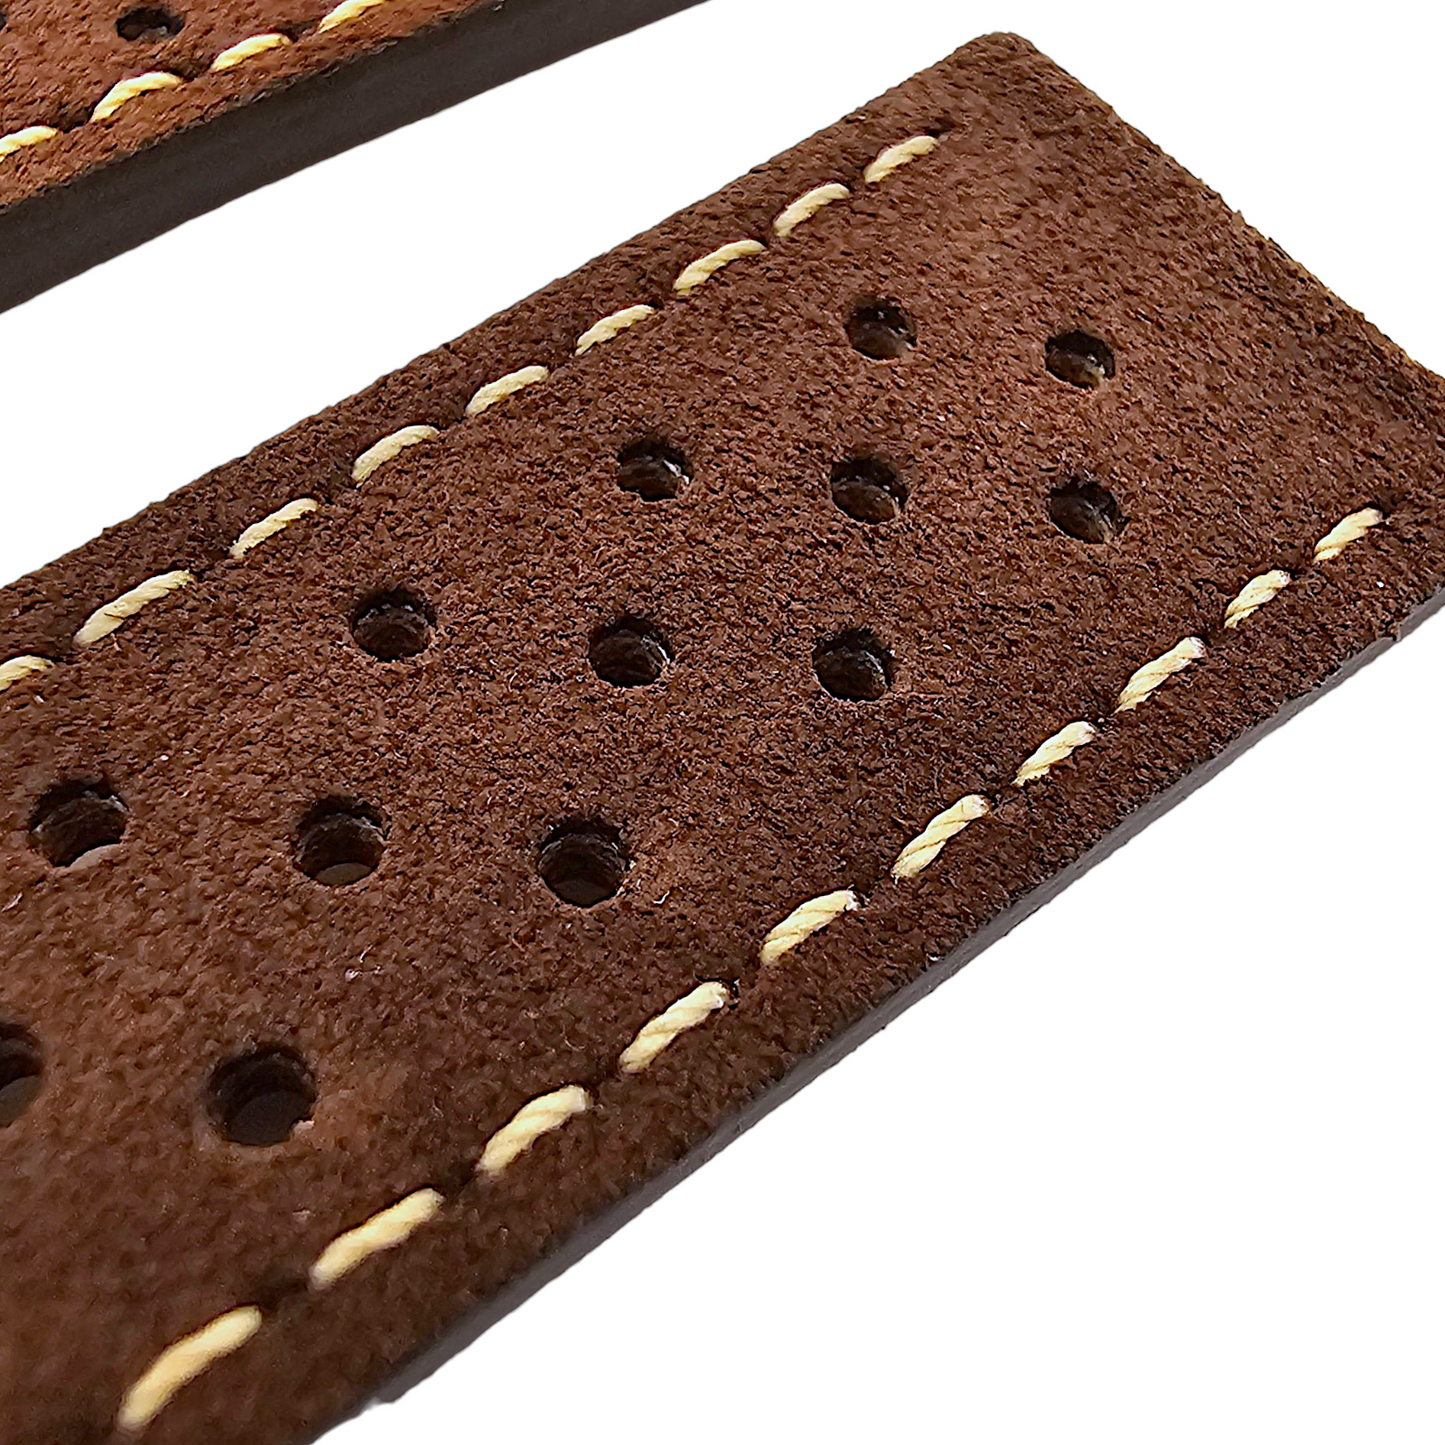 Vintage Italian Suede Watch Strap Rally Racing Chocolate Brown 20mm 22mm